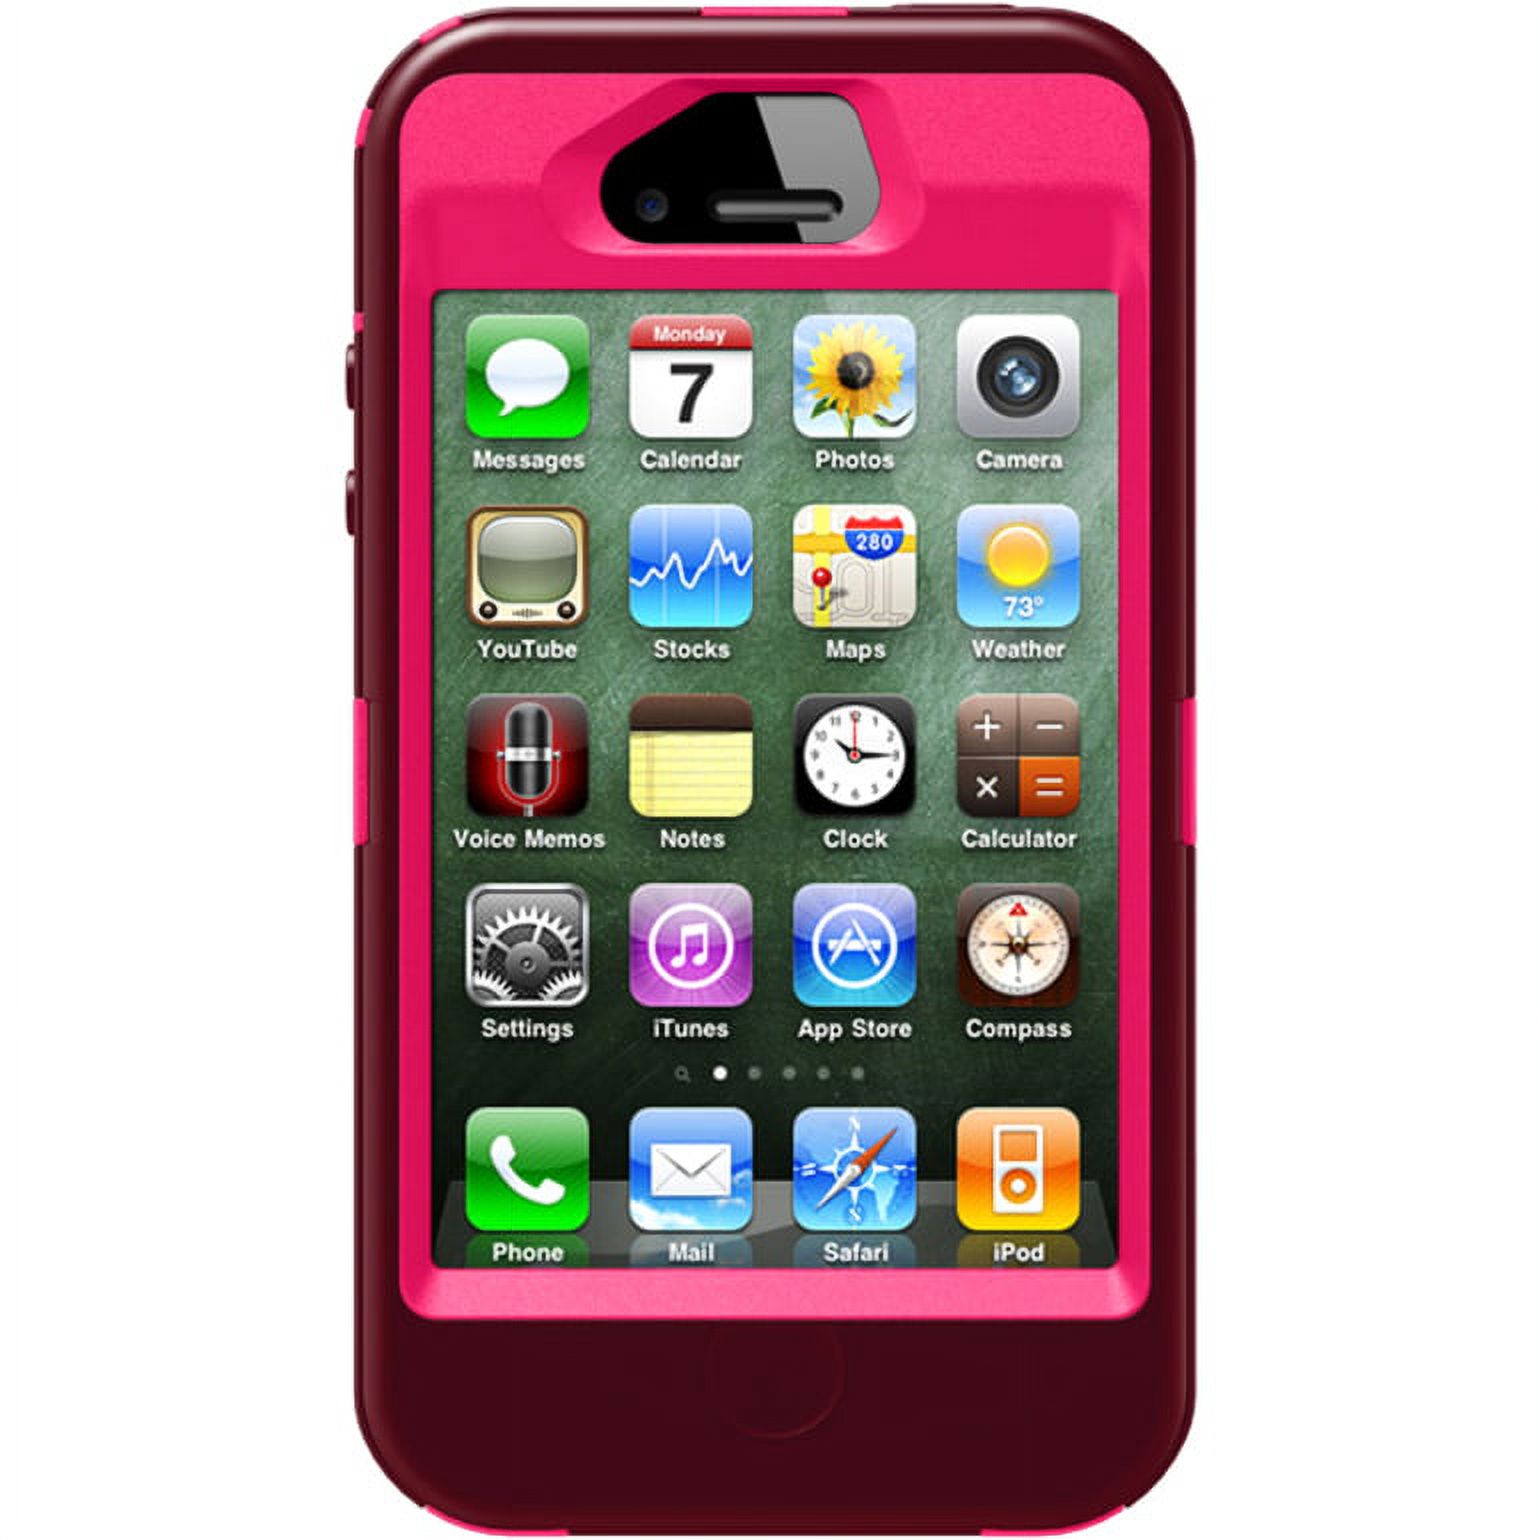 OtterBox Defender Rugged Carrying Case (Holster) Apple iPhone 4S, iPhone 4 Smartphone, Deep Plum, Peony Pink - image 2 of 5